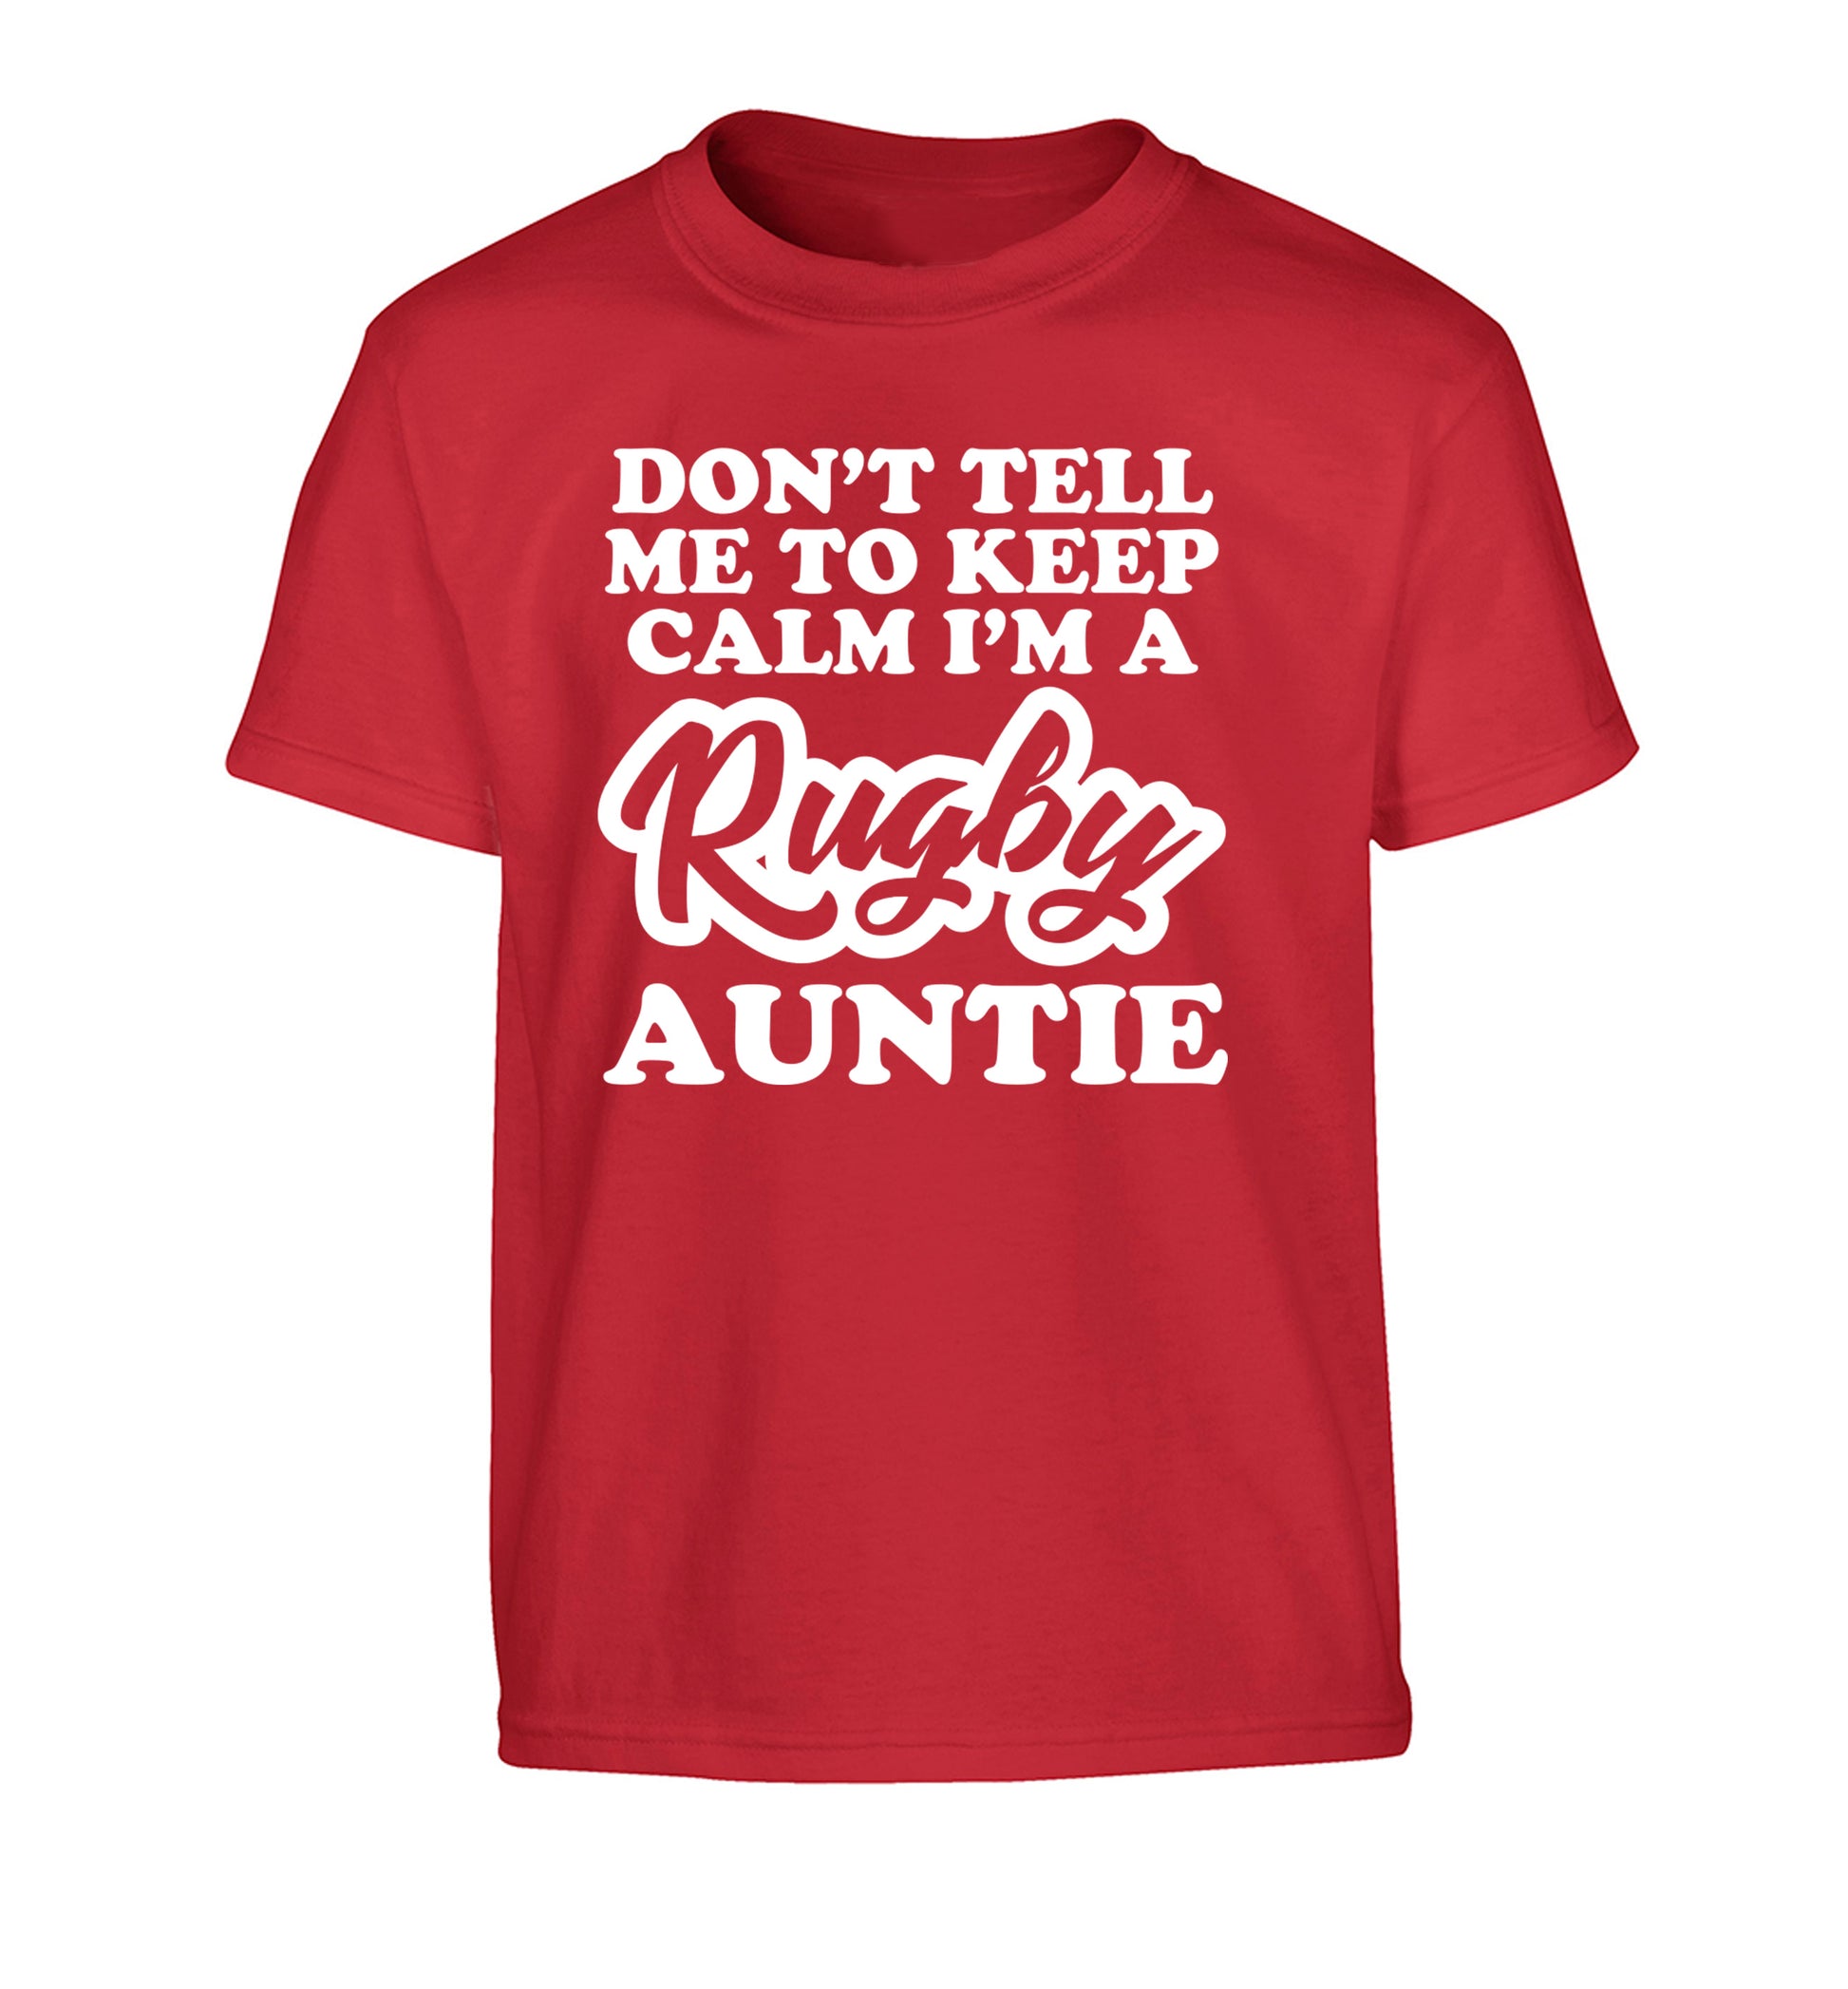 Don't tell me keep calm I'm a rugby auntie Children's red Tshirt 12-13 Years